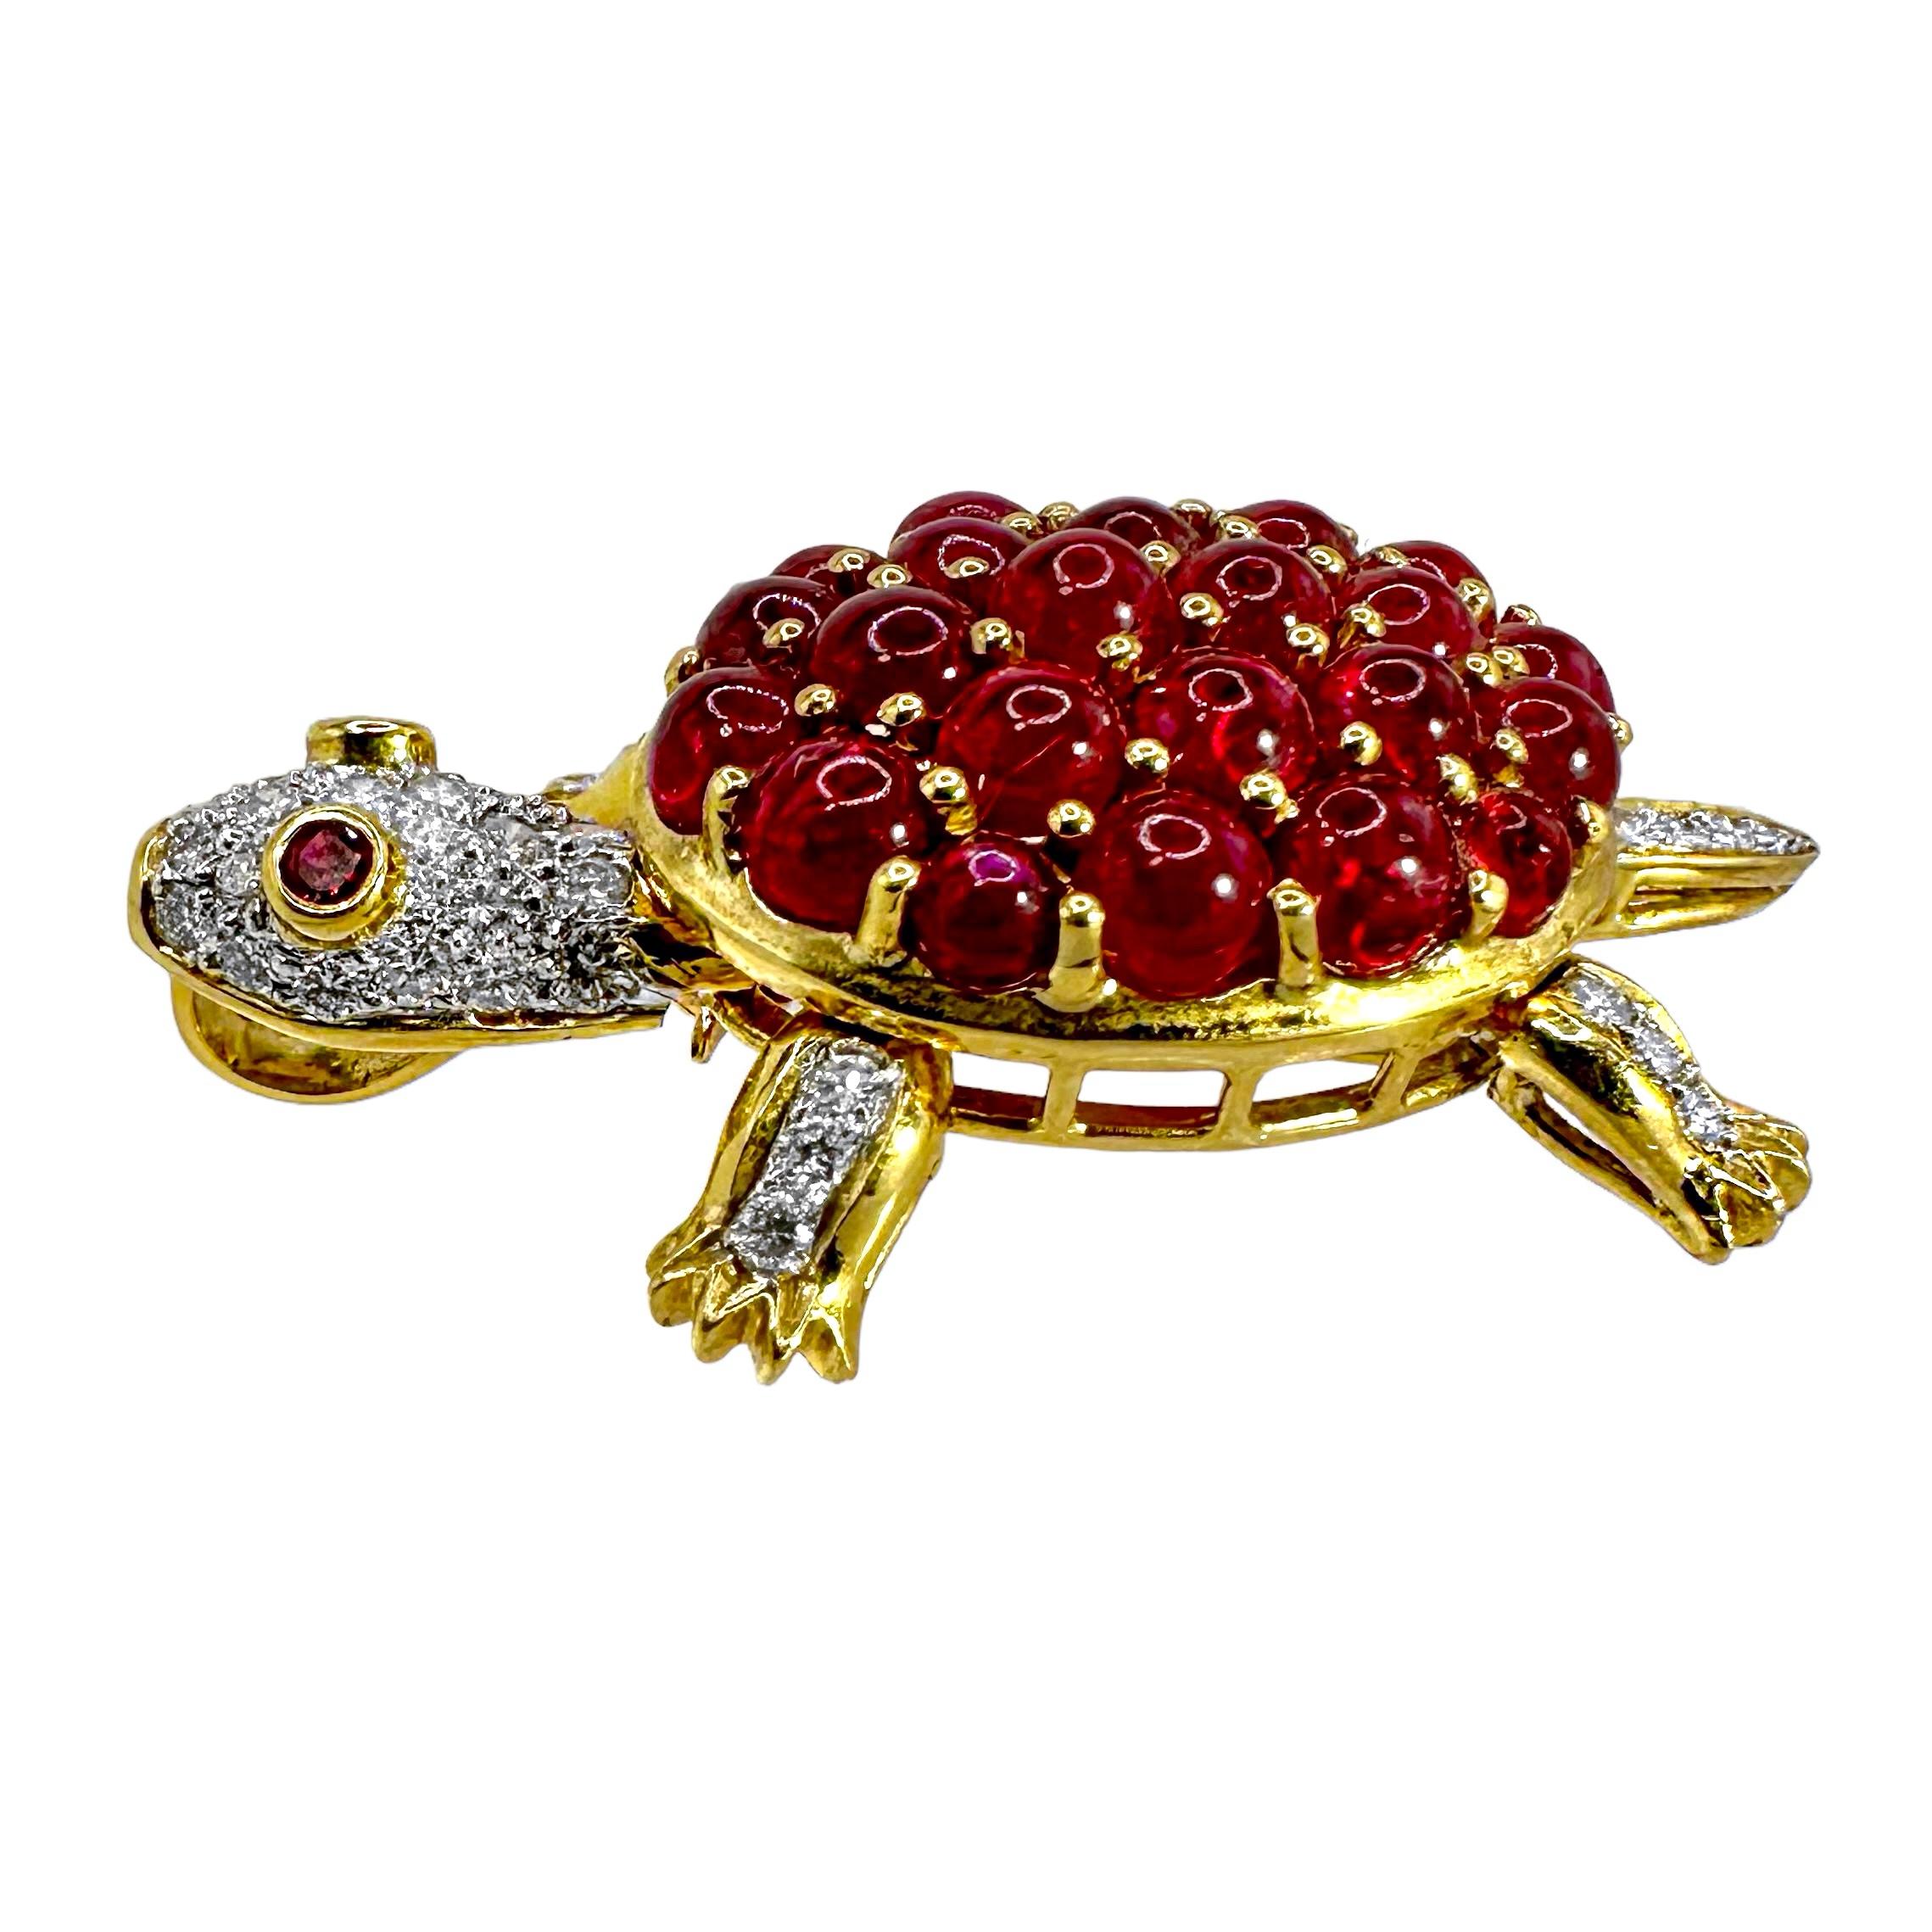 Adorable Turtle Brooch/Pendant with Motion in 18K Gold, Diamonds, and Rubies For Sale 4